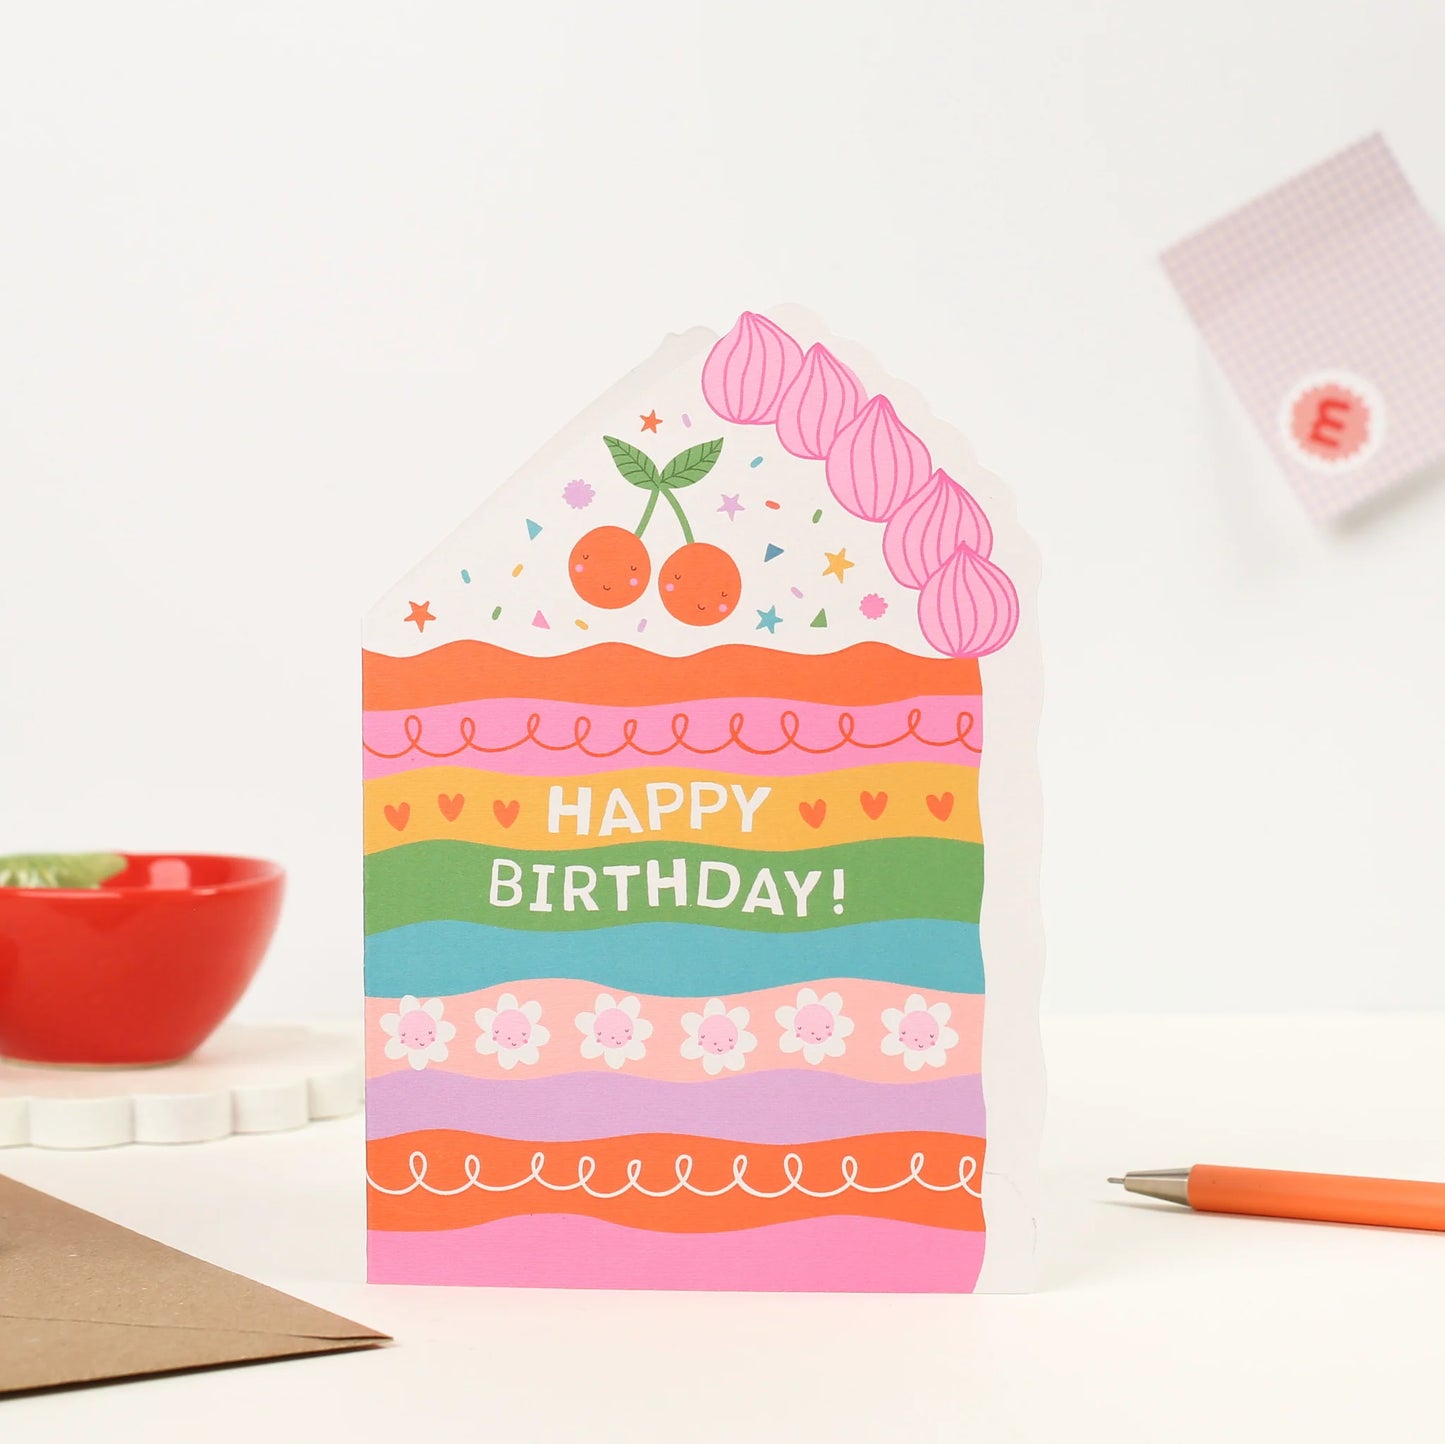 Happy Birthday Card (Wishing You A) – Passiontree Velvet